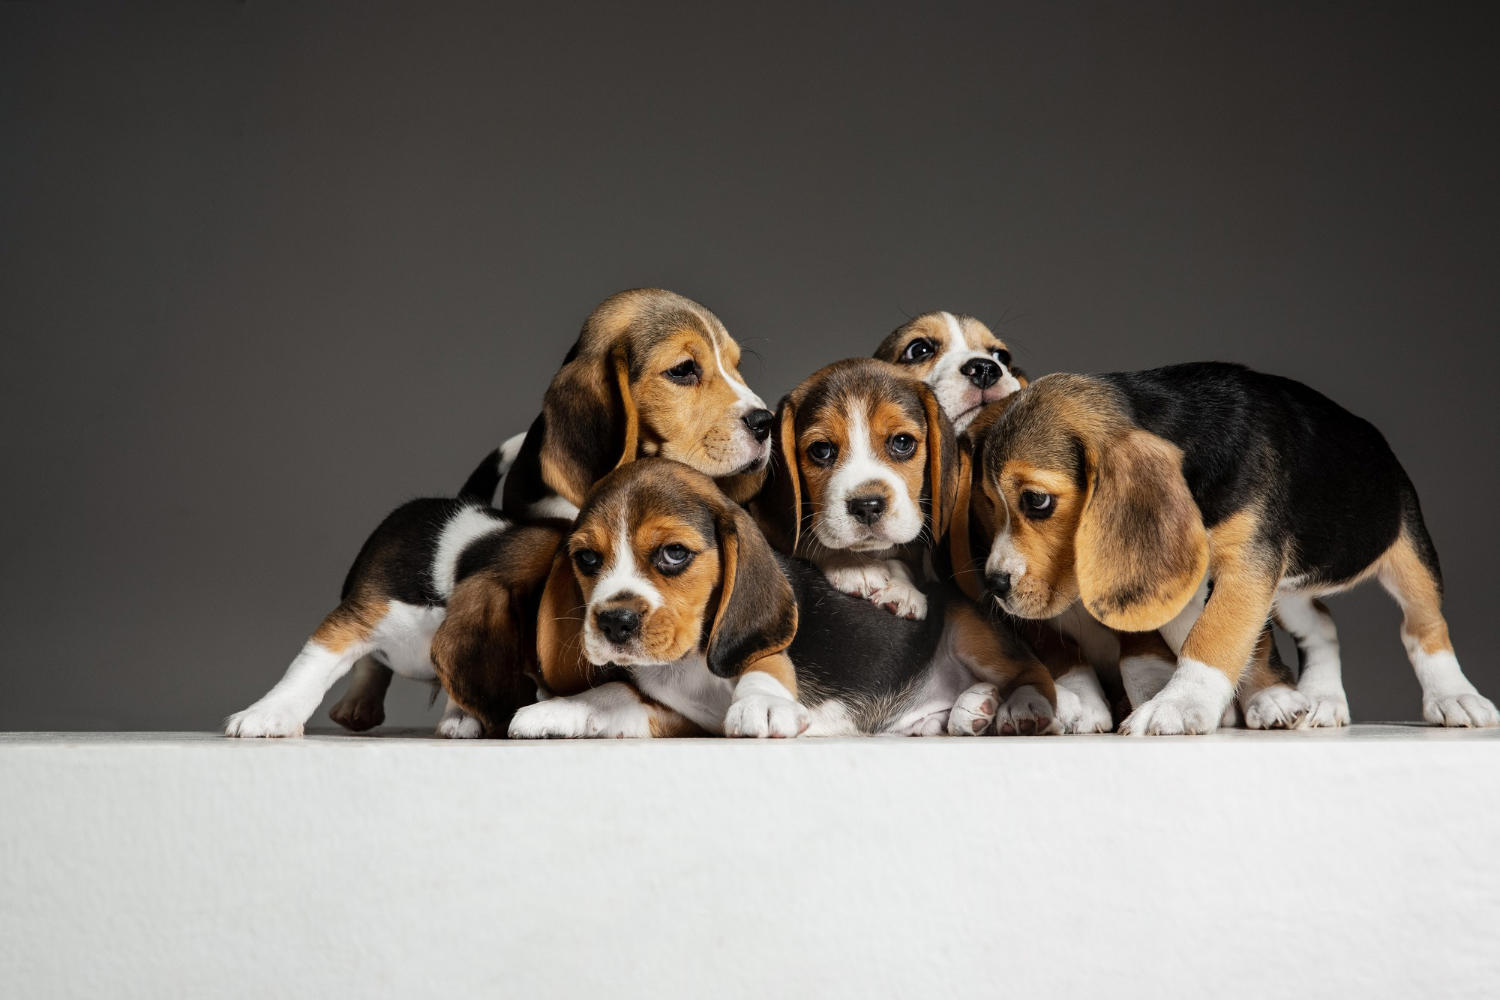 The Sweet and Affectionate Beagle: A Loving Companion for Everyone